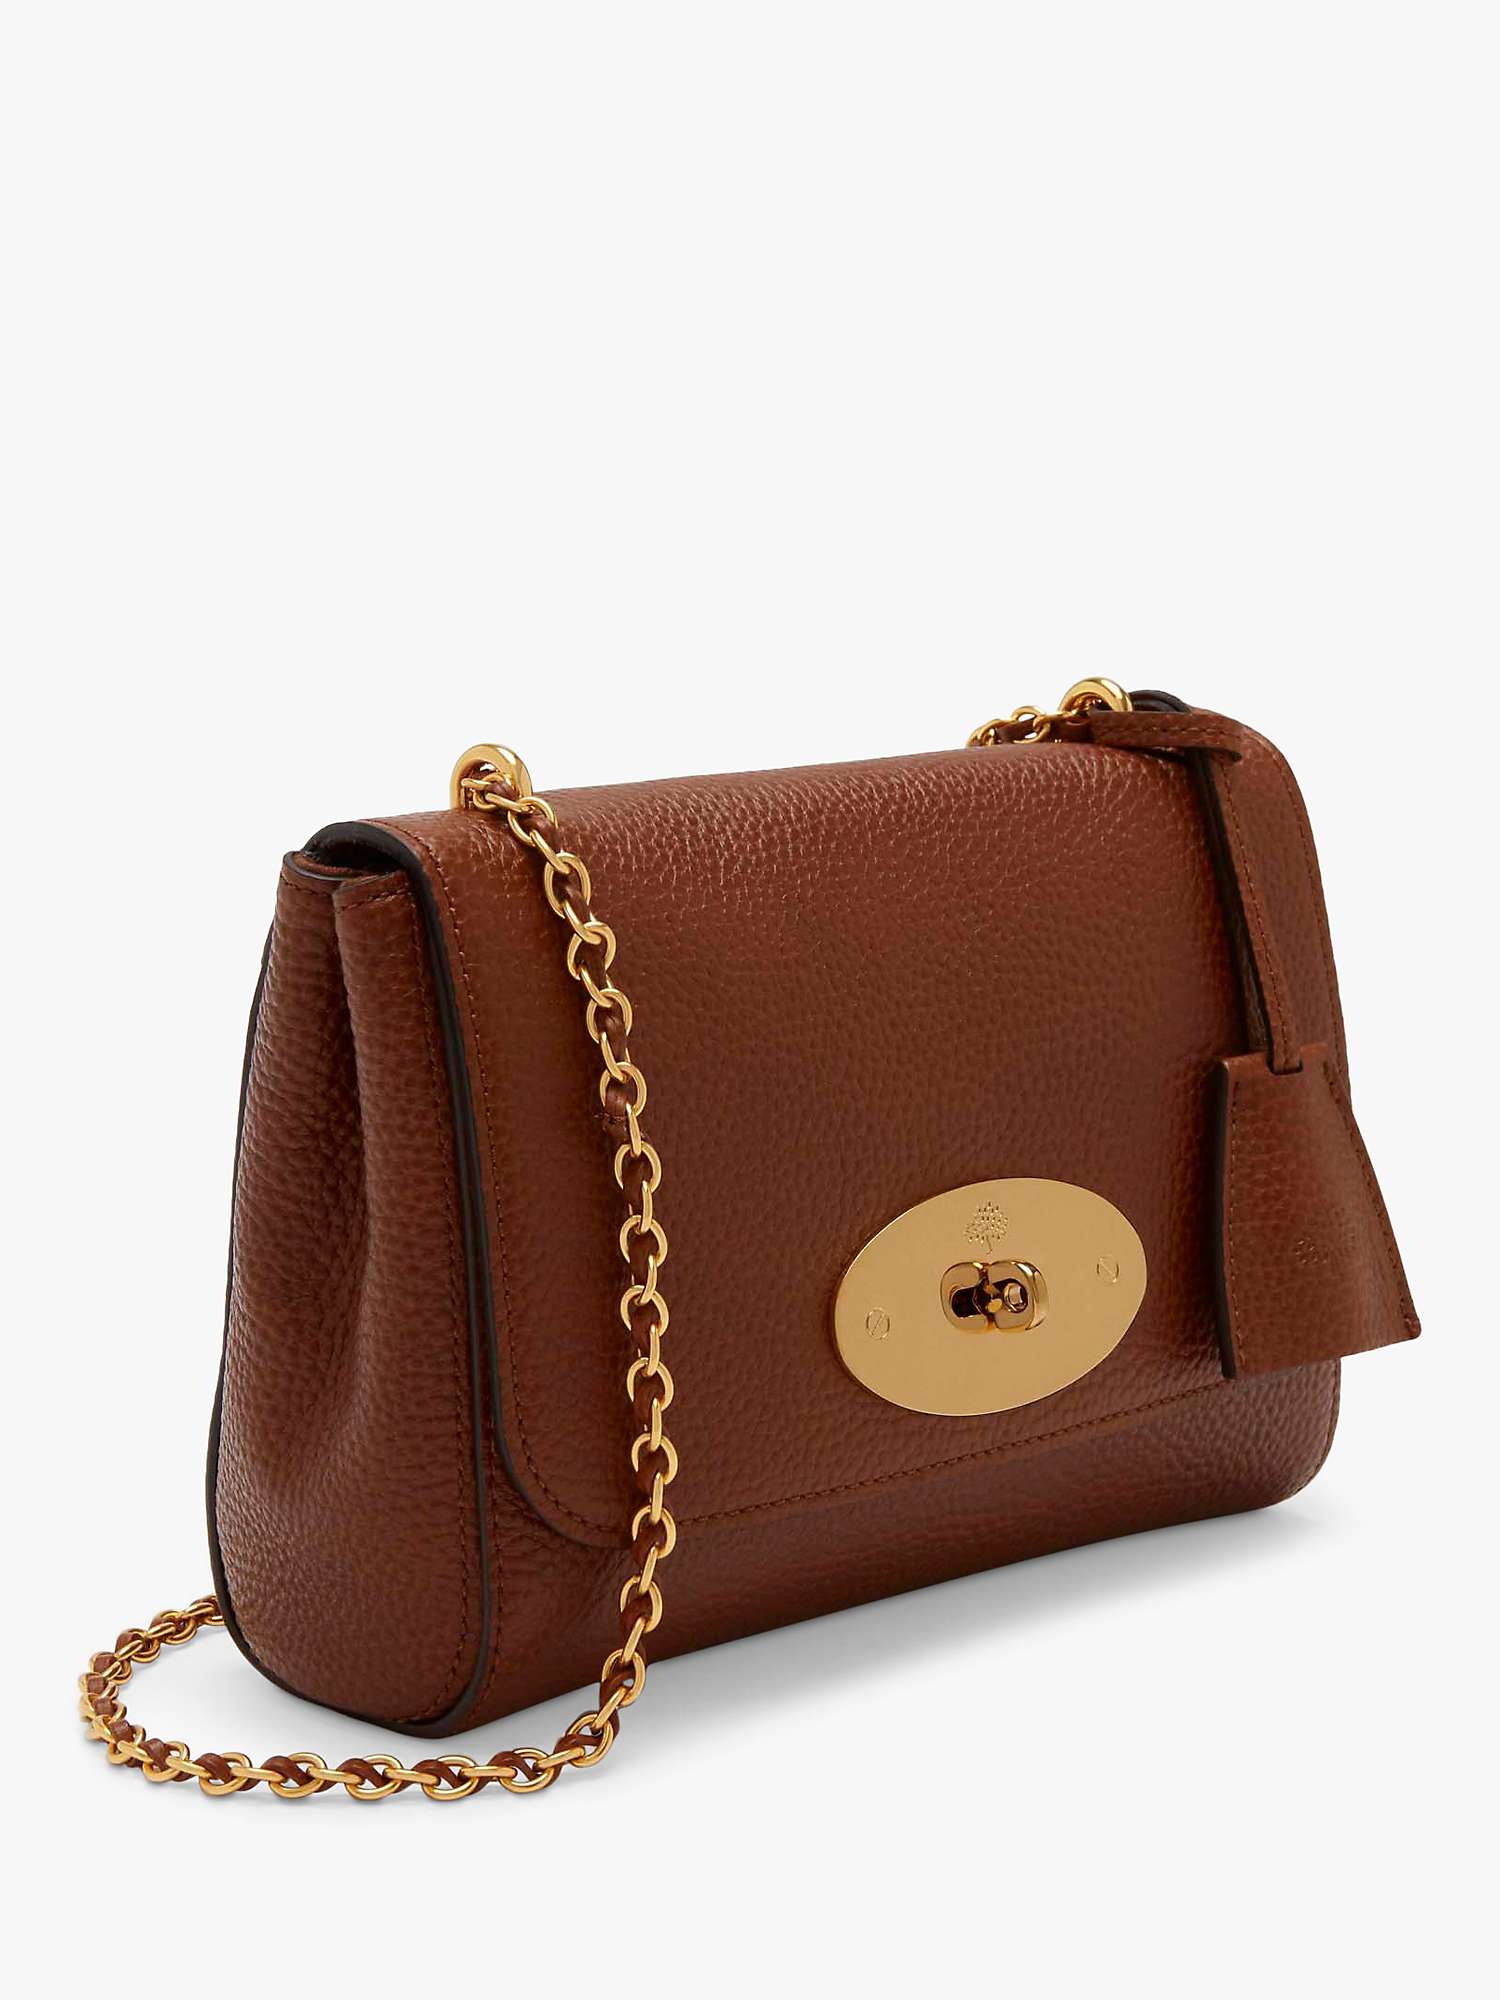 Buy Mulberry Lily Classic Grain Leather Shoulder Bag Online at johnlewis.com